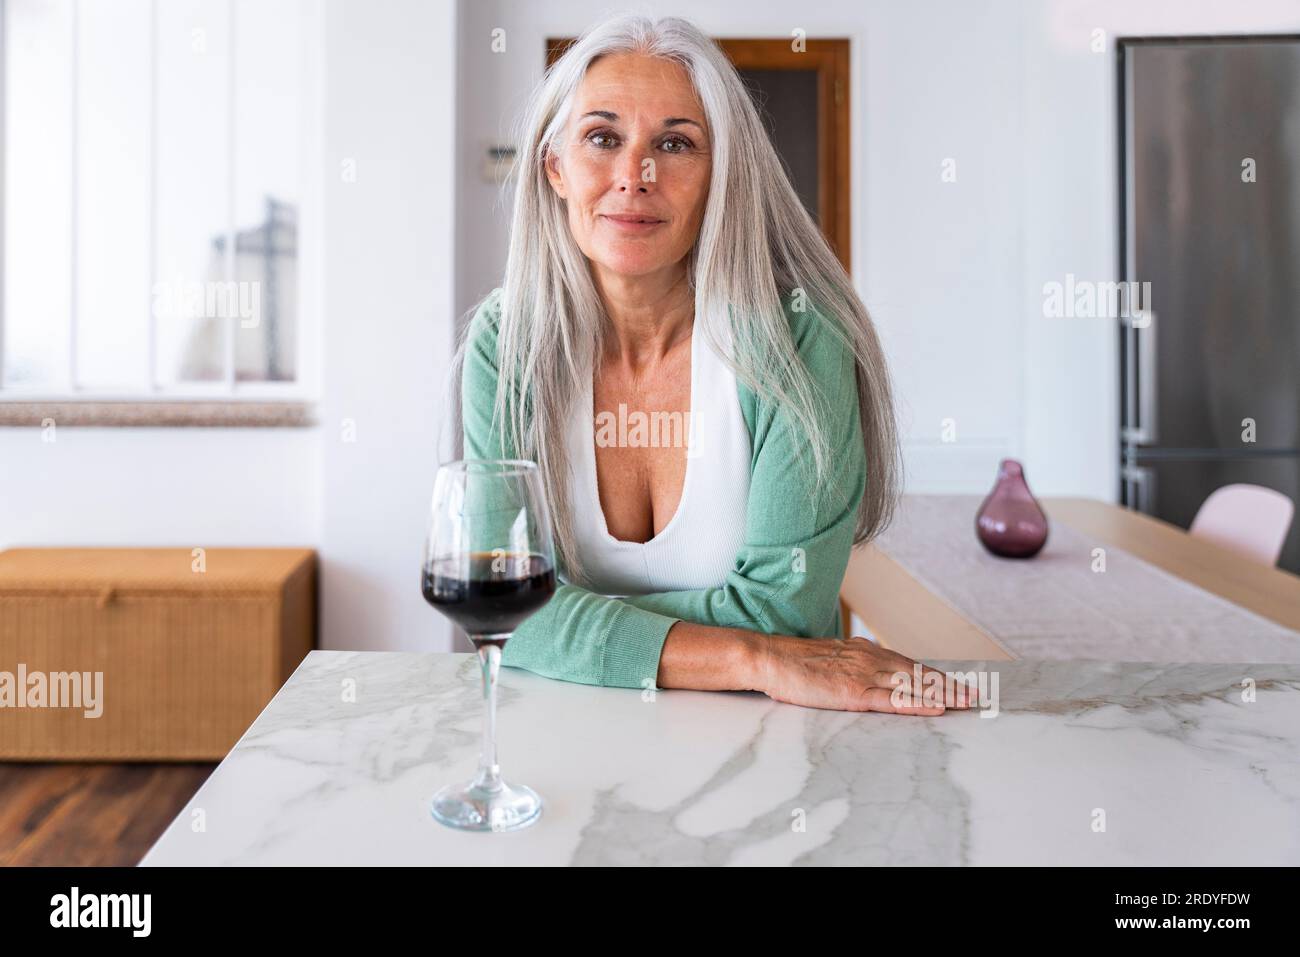 Smiling woman with glass of wine leaning on kitchen island Stock Photo